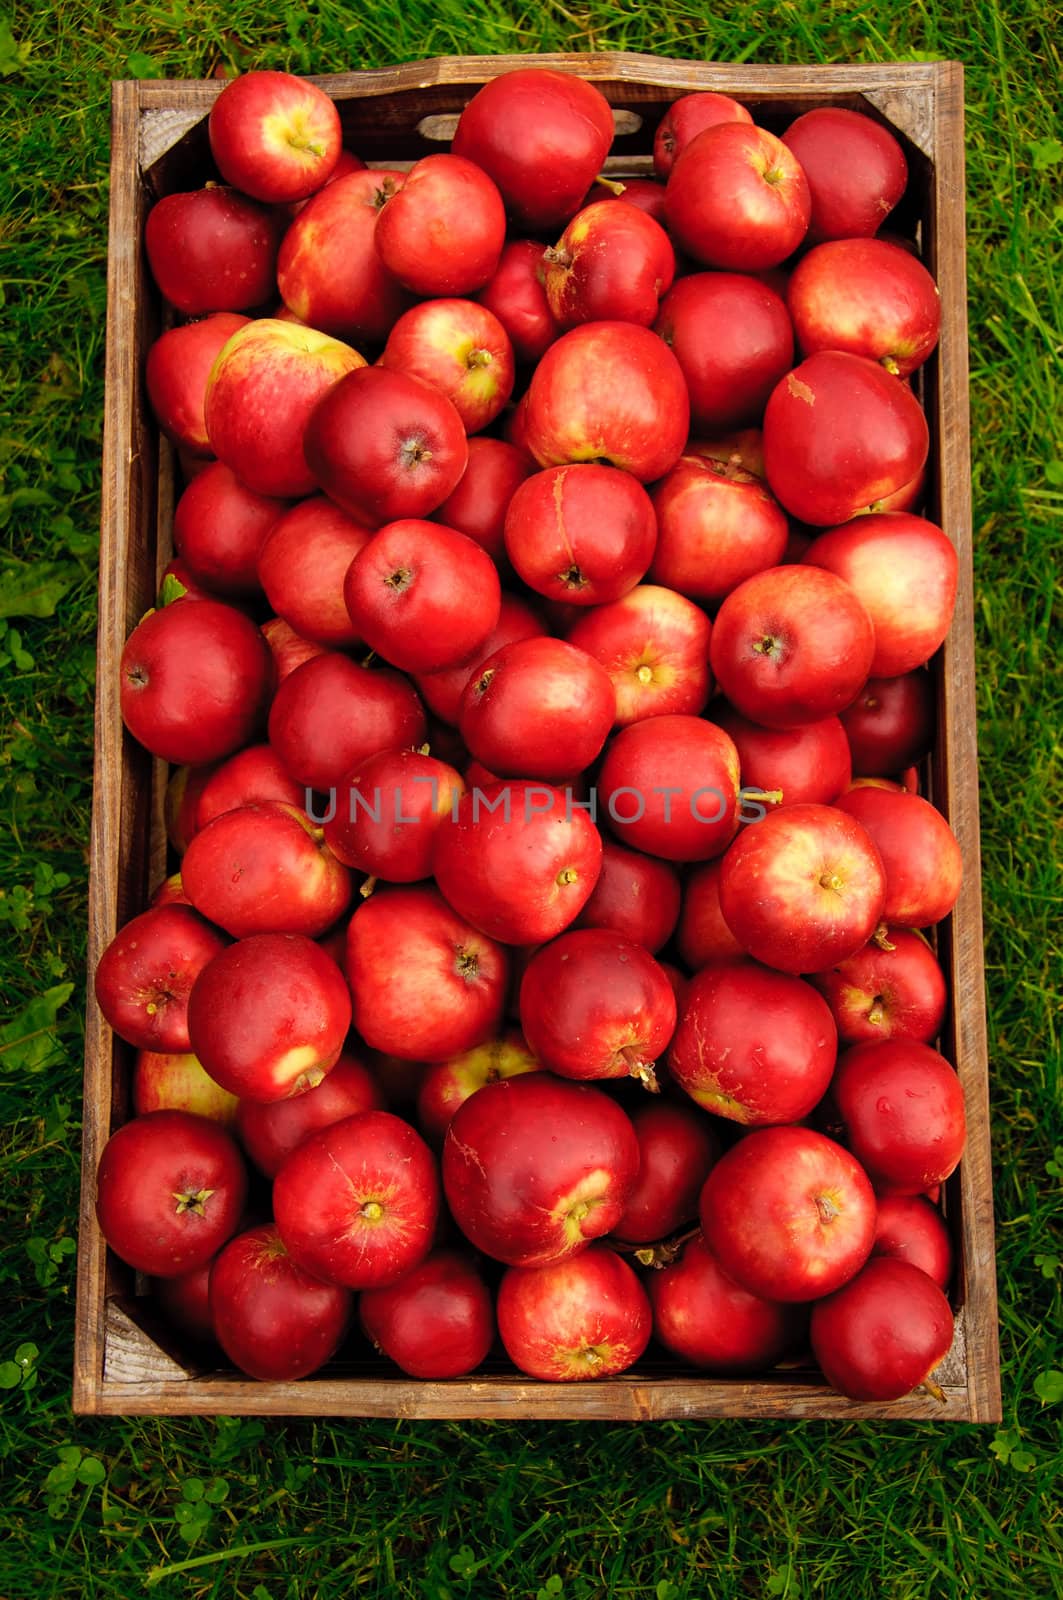 Red apples in a wooden box seen from above